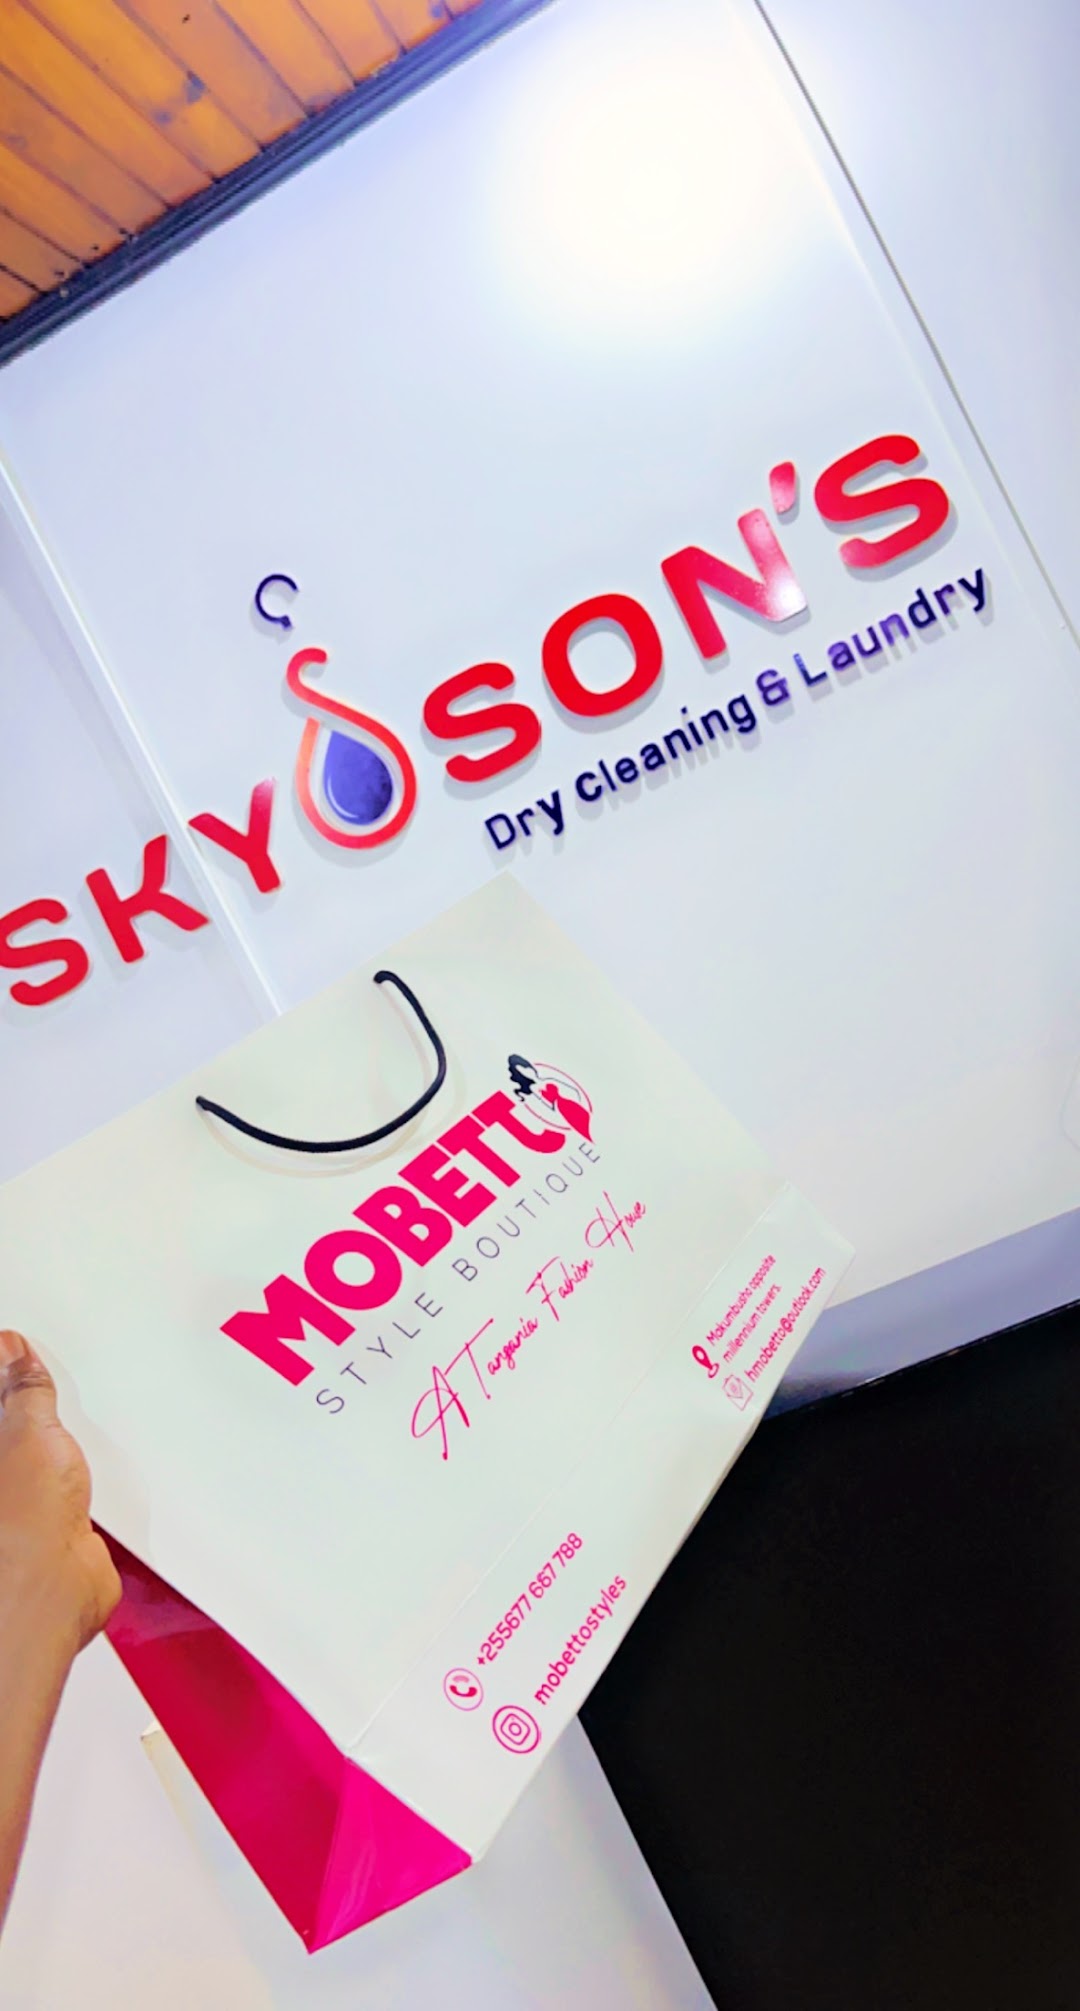 Sky and sons laundry and dry cleaning